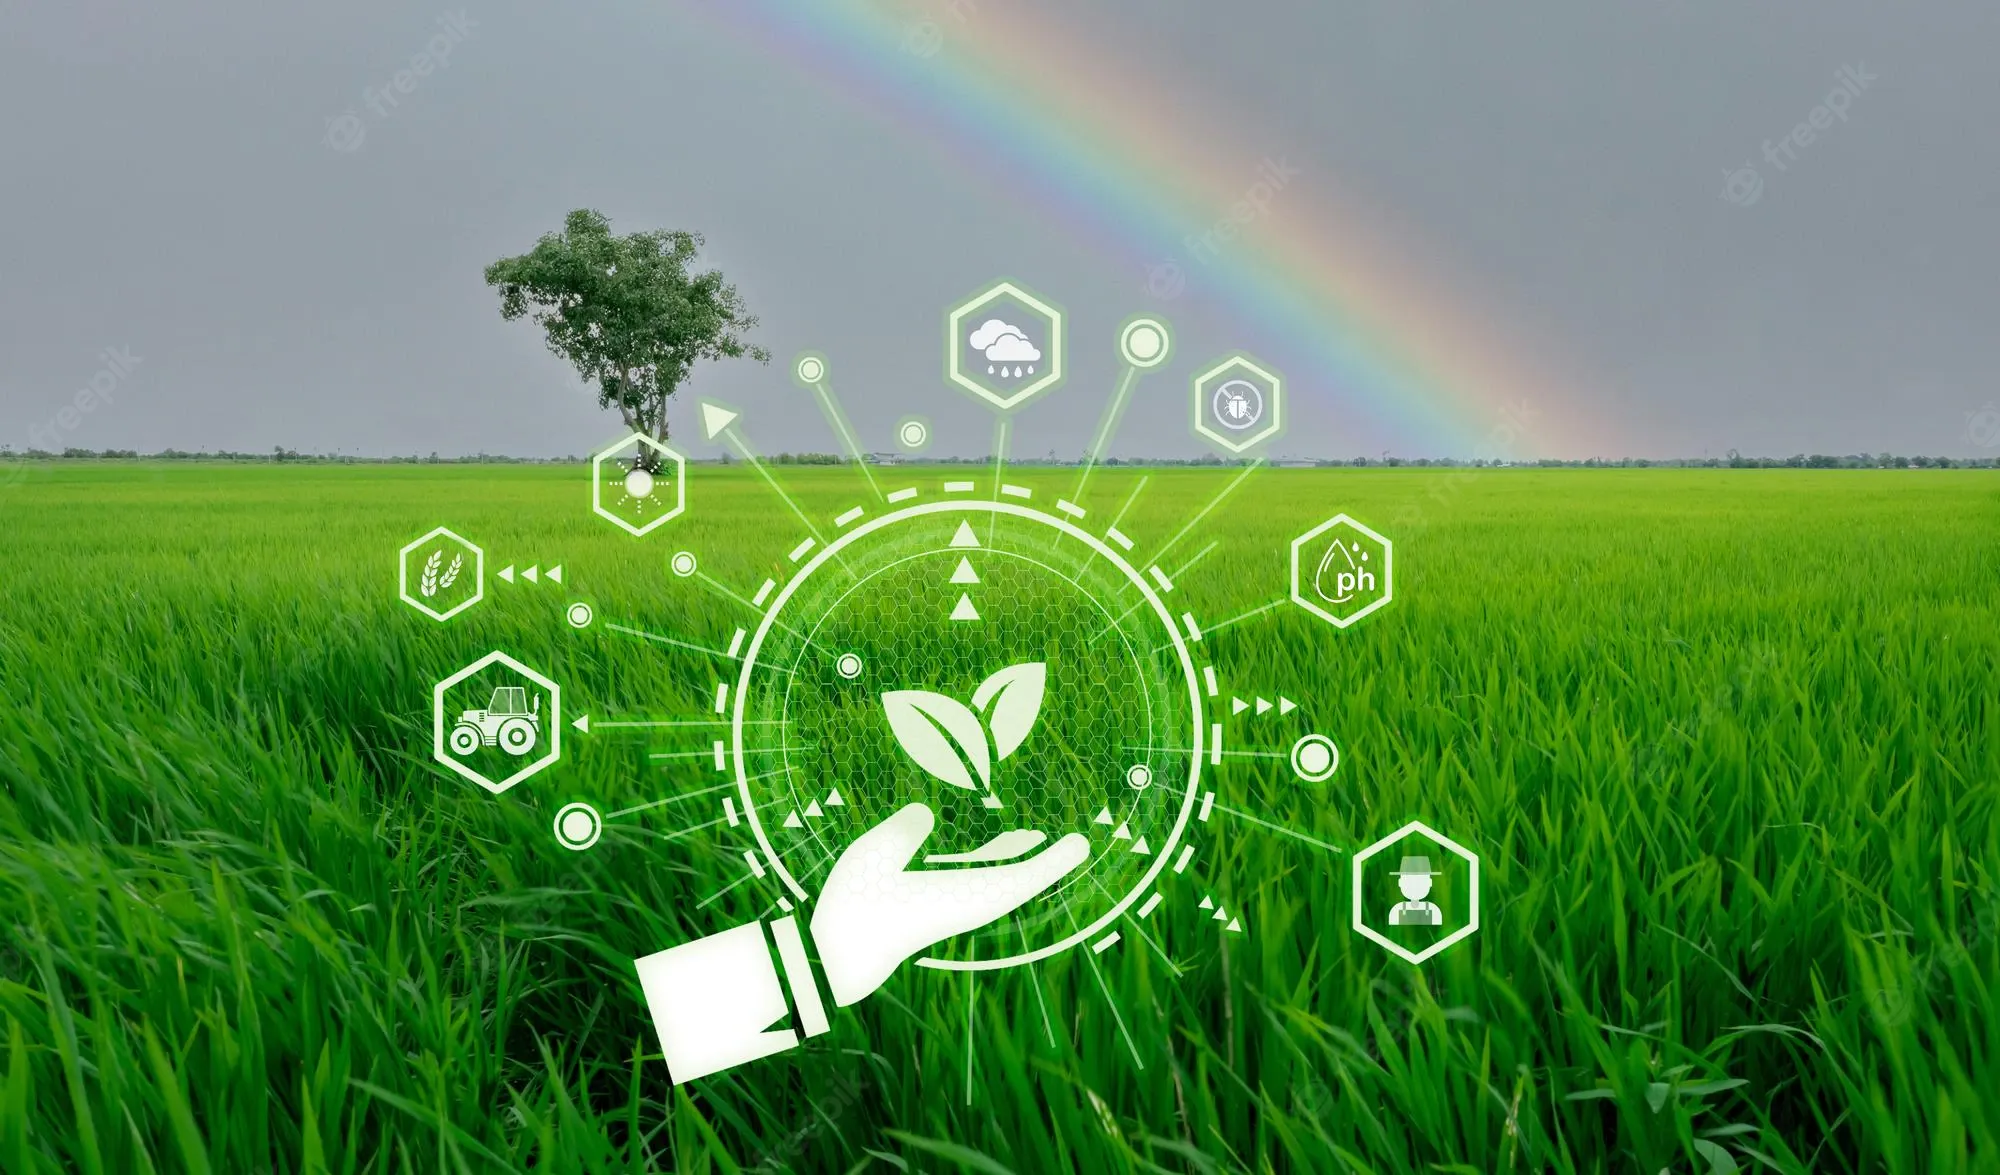 Connected farming: Short guide for agribusinesses